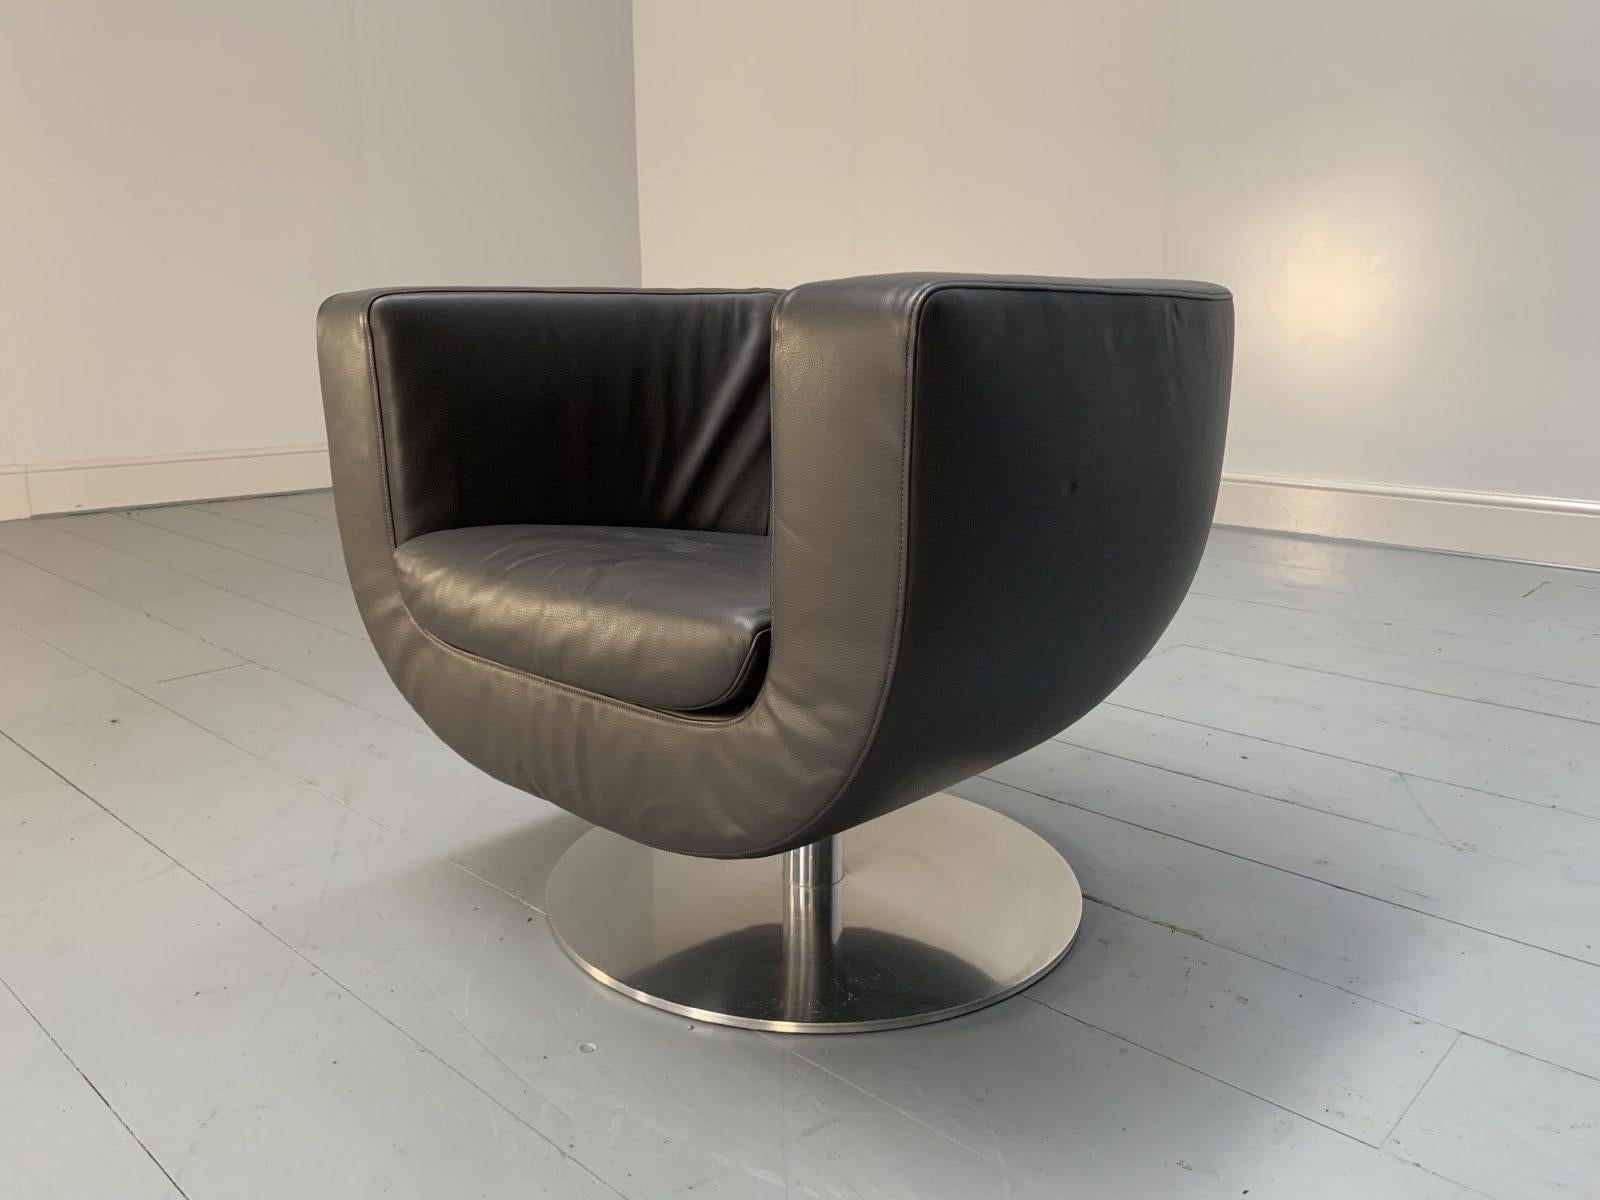 B&B Italia Tulip Chair in Dark Brown Leather In Good Condition For Sale In Barrowford, GB